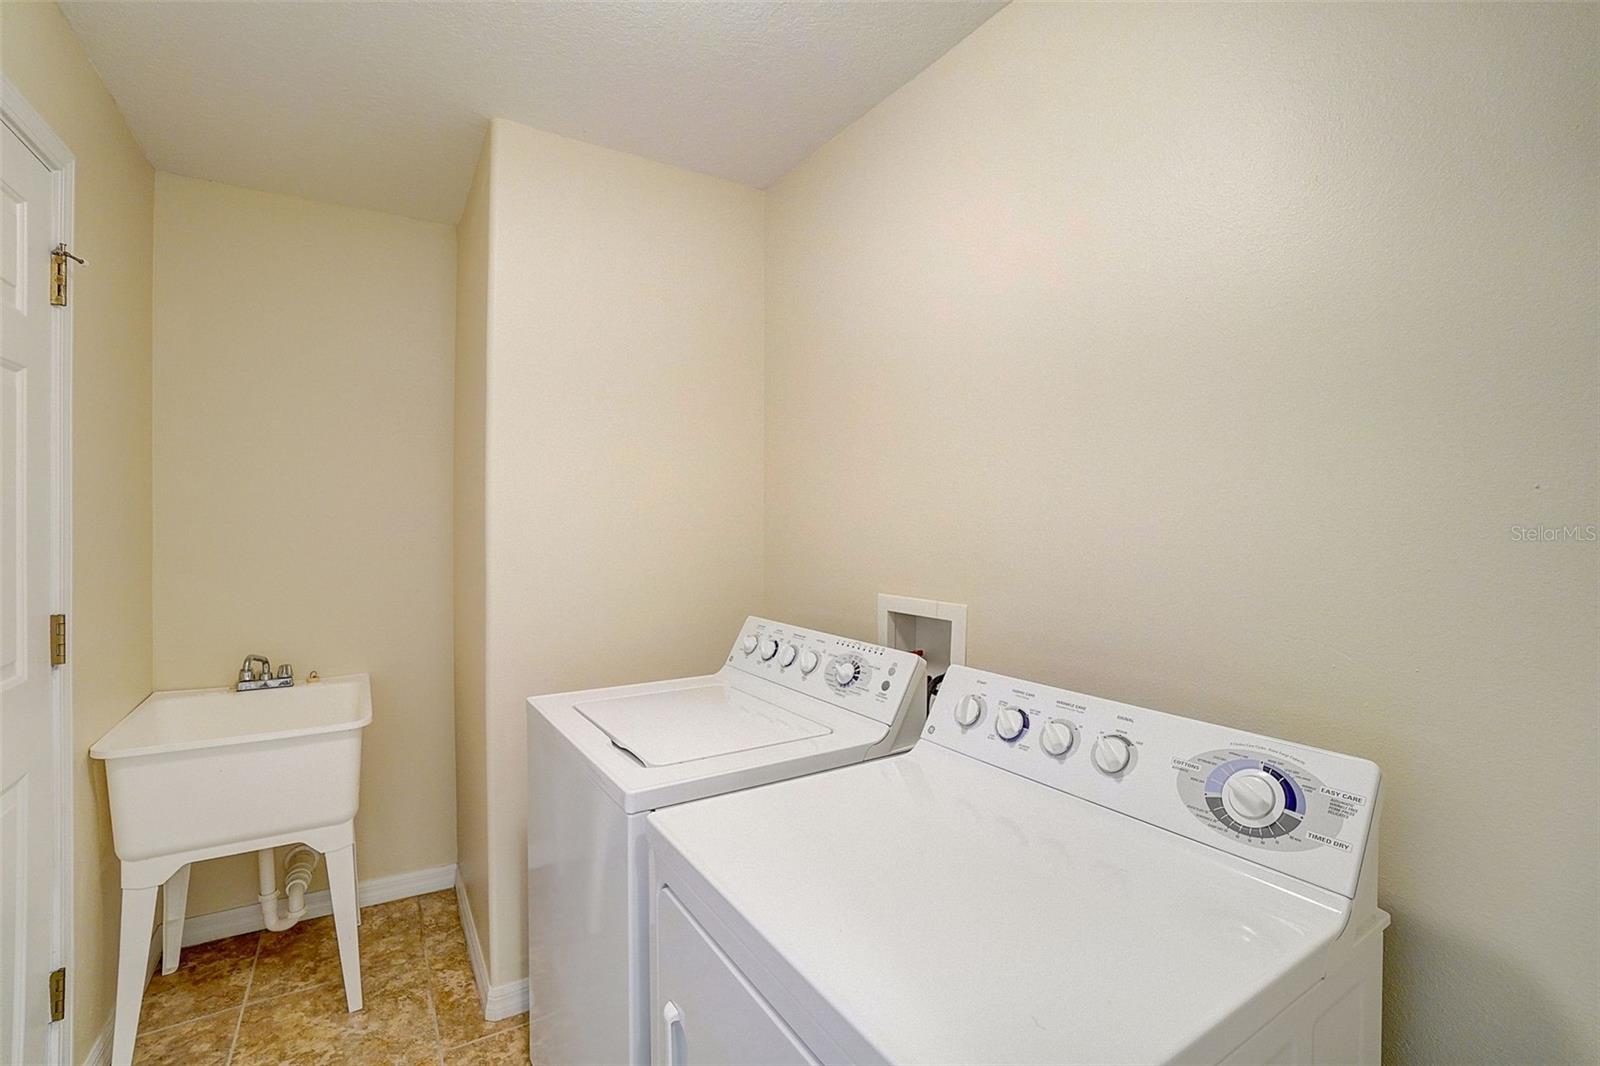 Laundry room with "slop-sink"